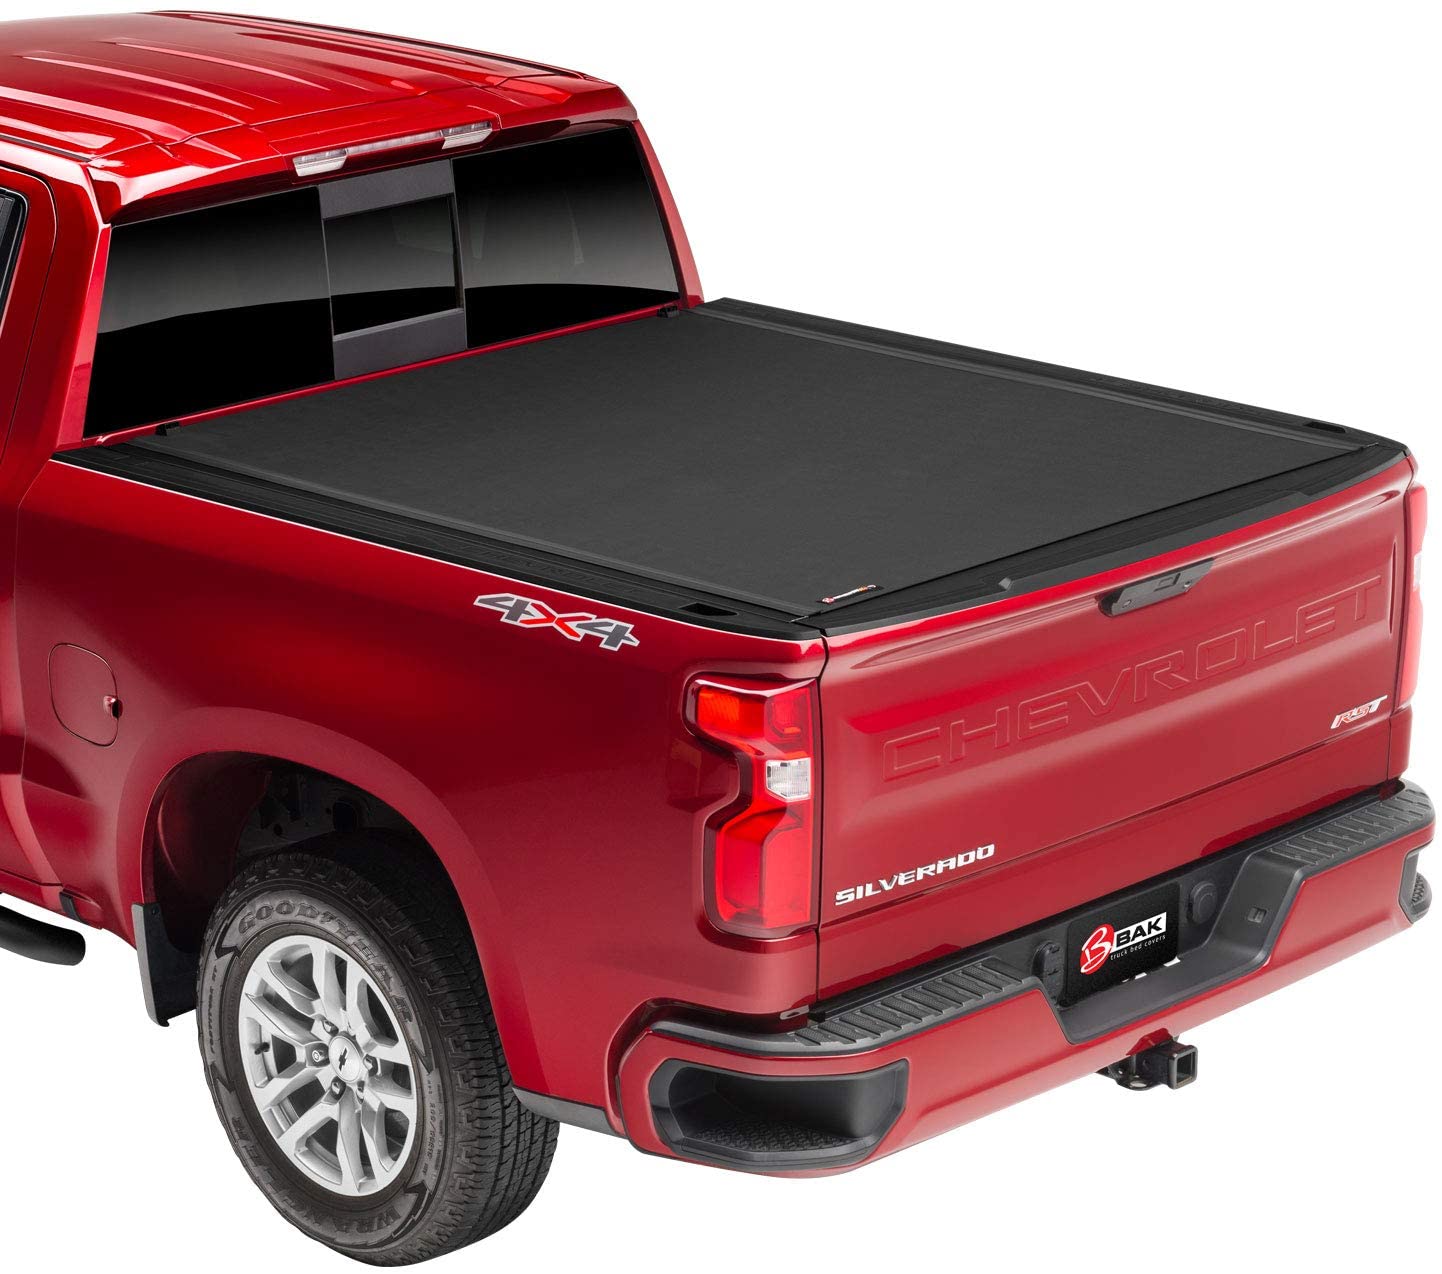 Which tonneau cover should I buy